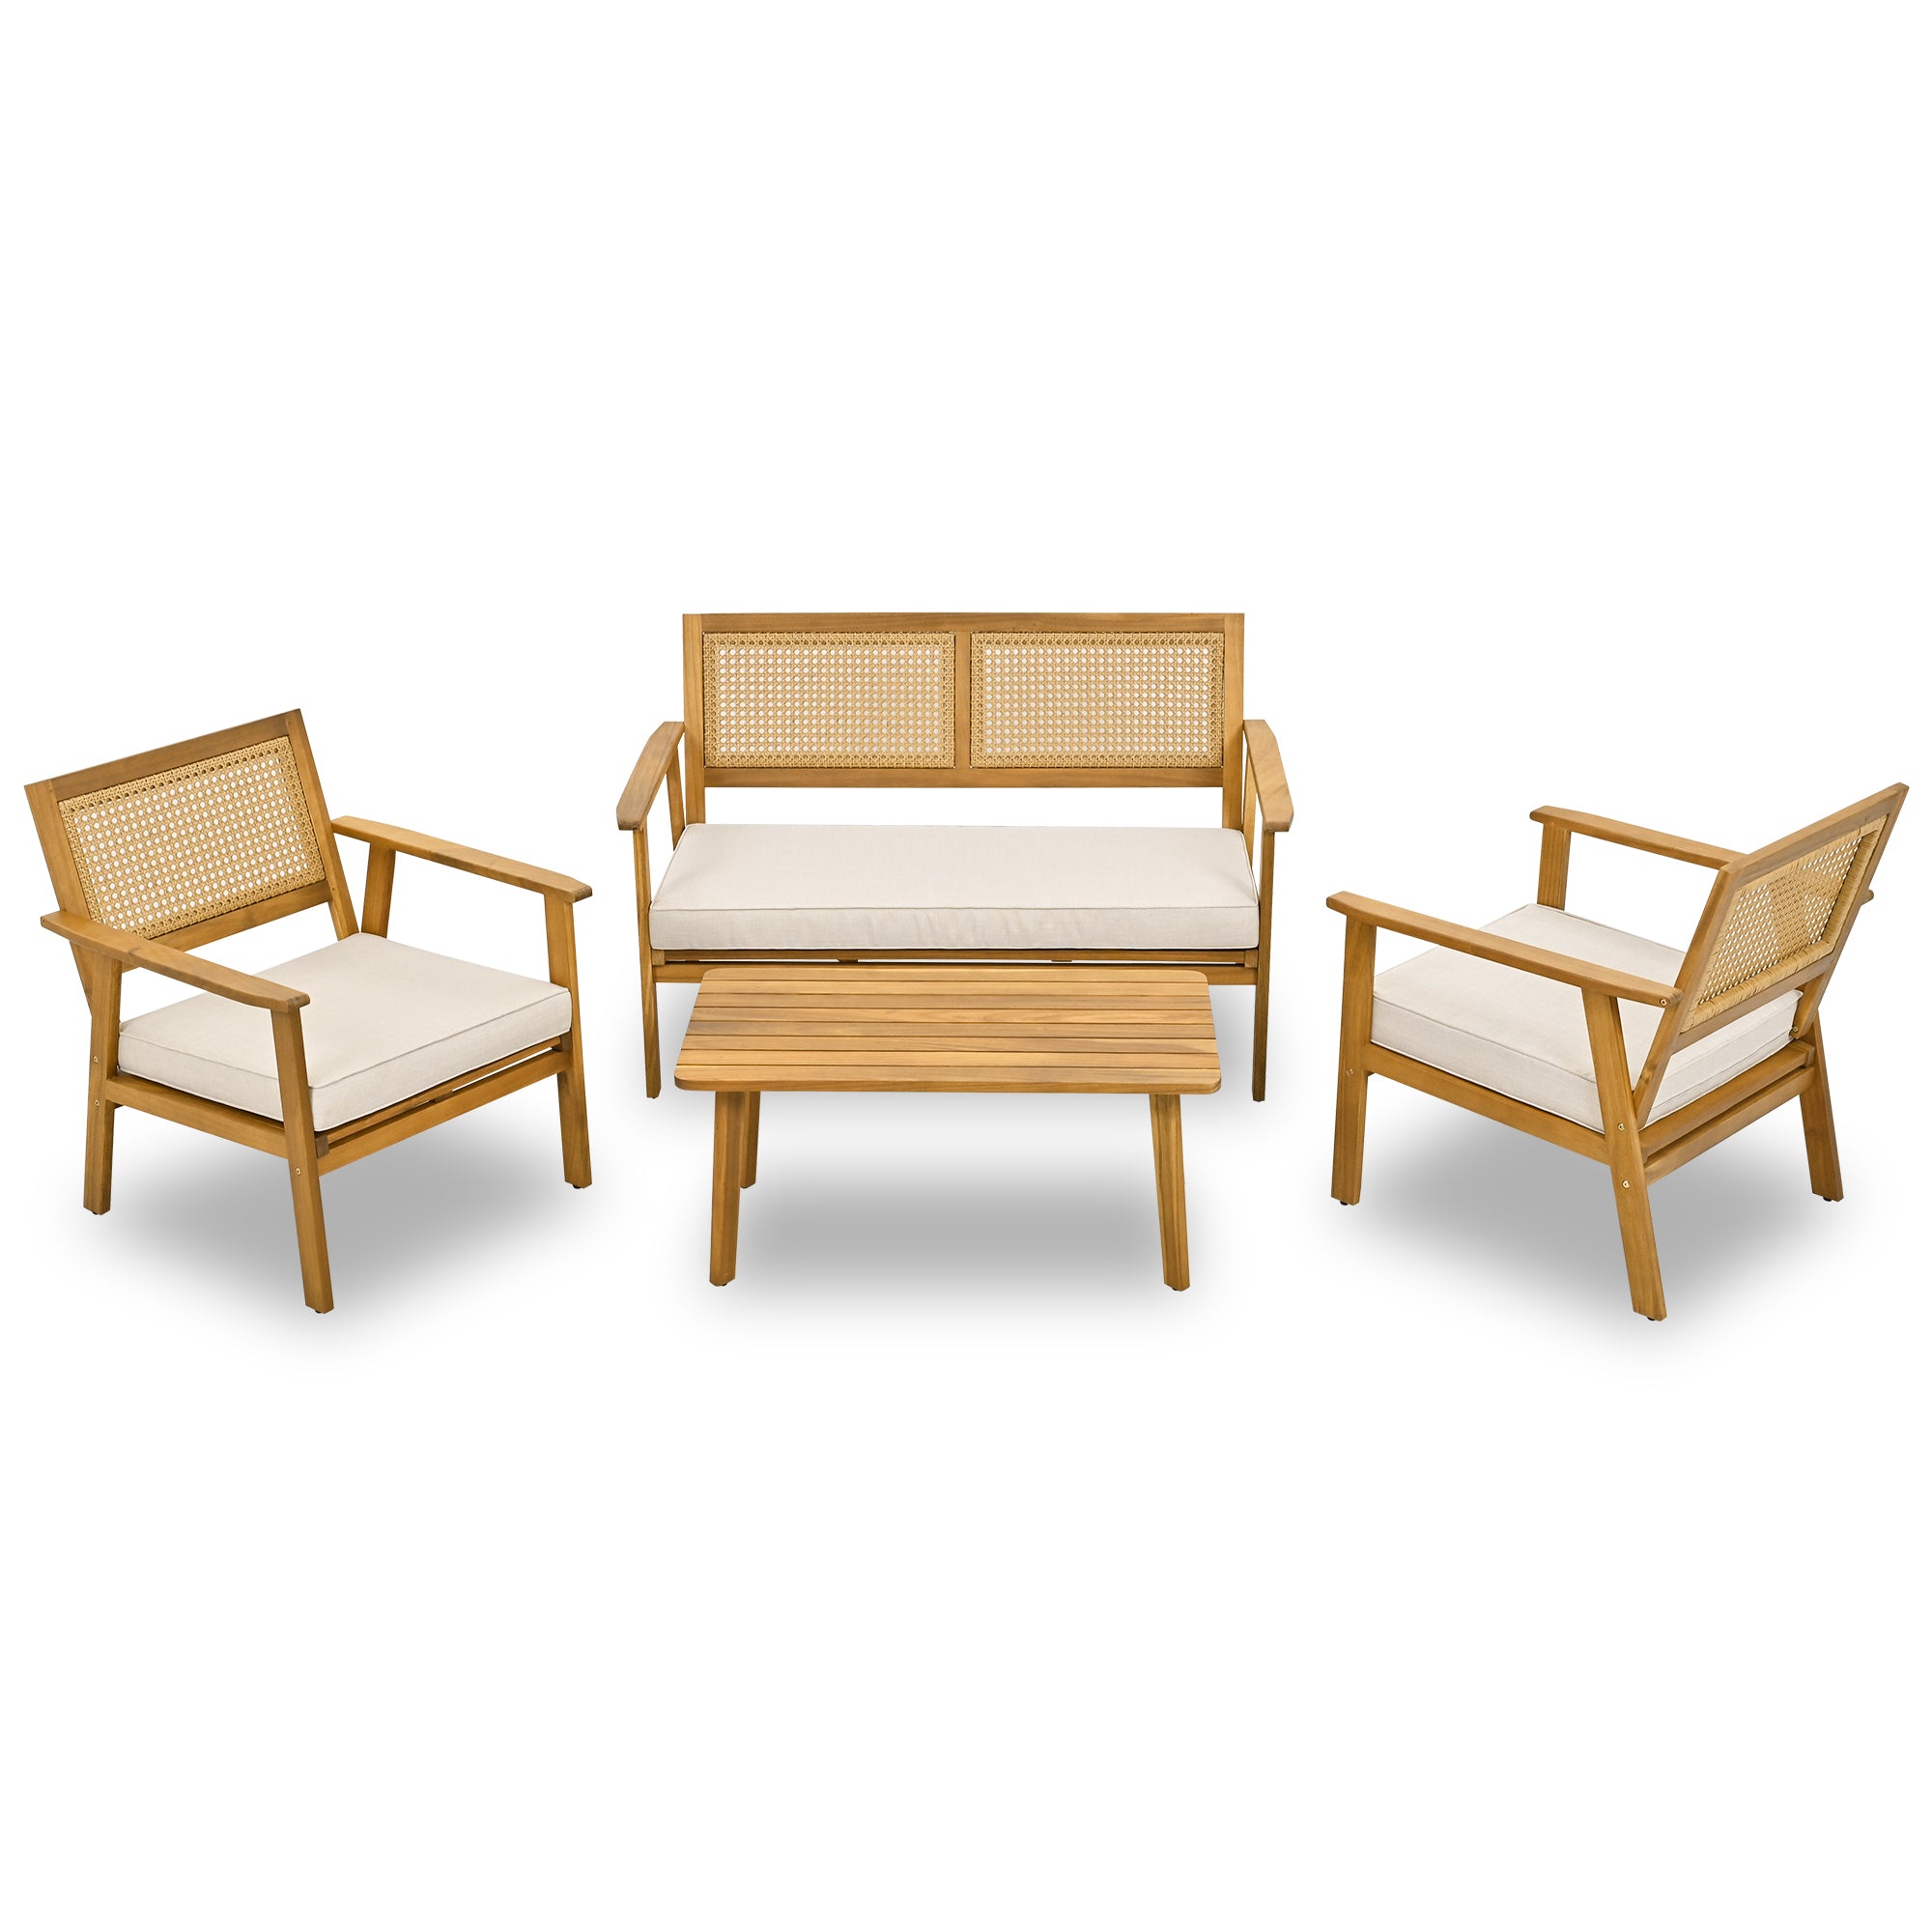 4 Pcs Acacia Wood Sofa Set, Outdoor Chair Set with Wicker Mesh Backrest, Beige Cushions